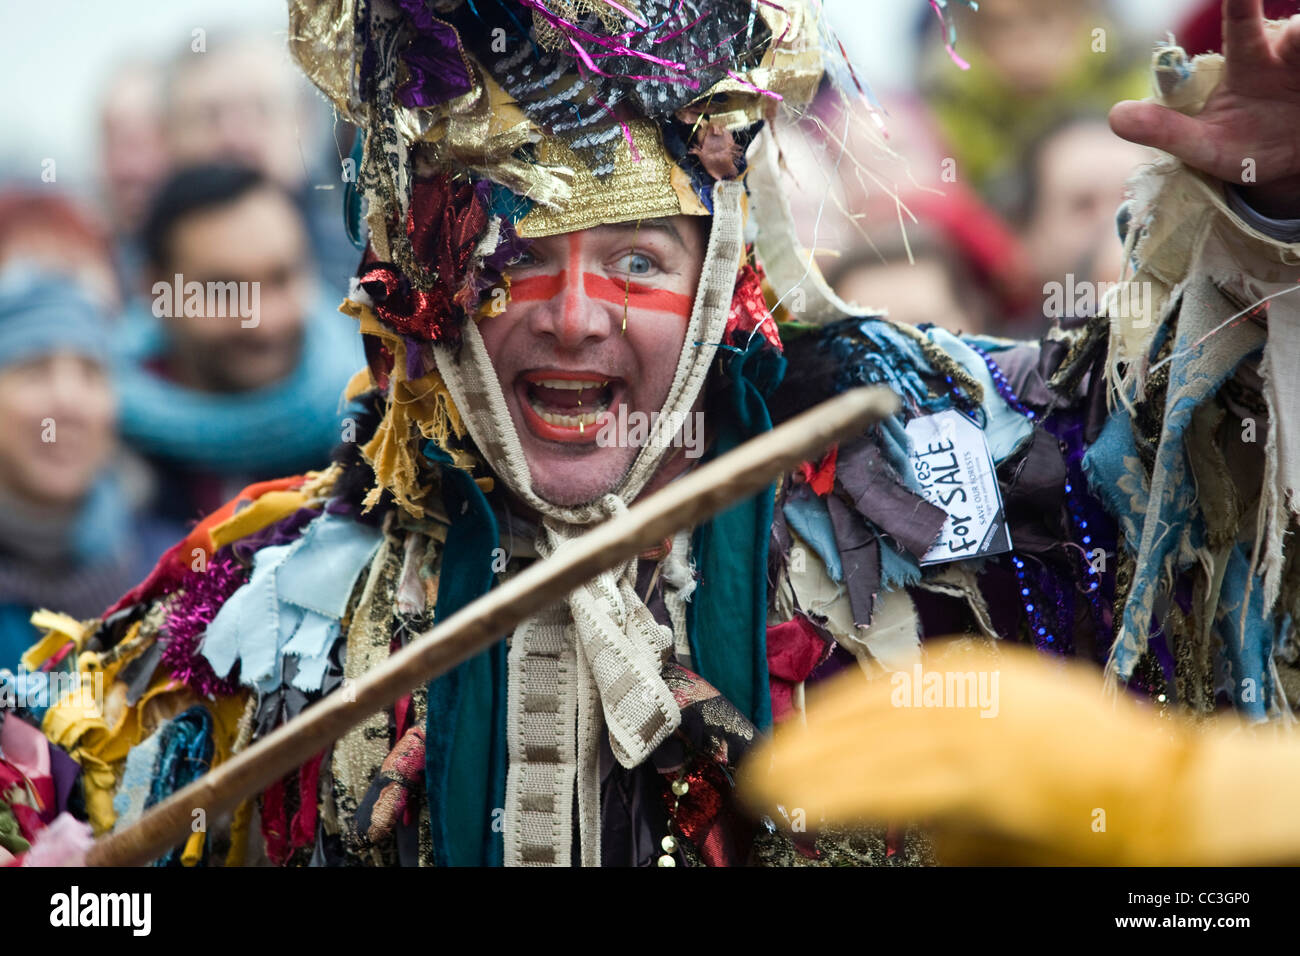 An actor dressed as St George fights in a traditional play celebrating a 'wassail' to herald the new year. Stock Photo